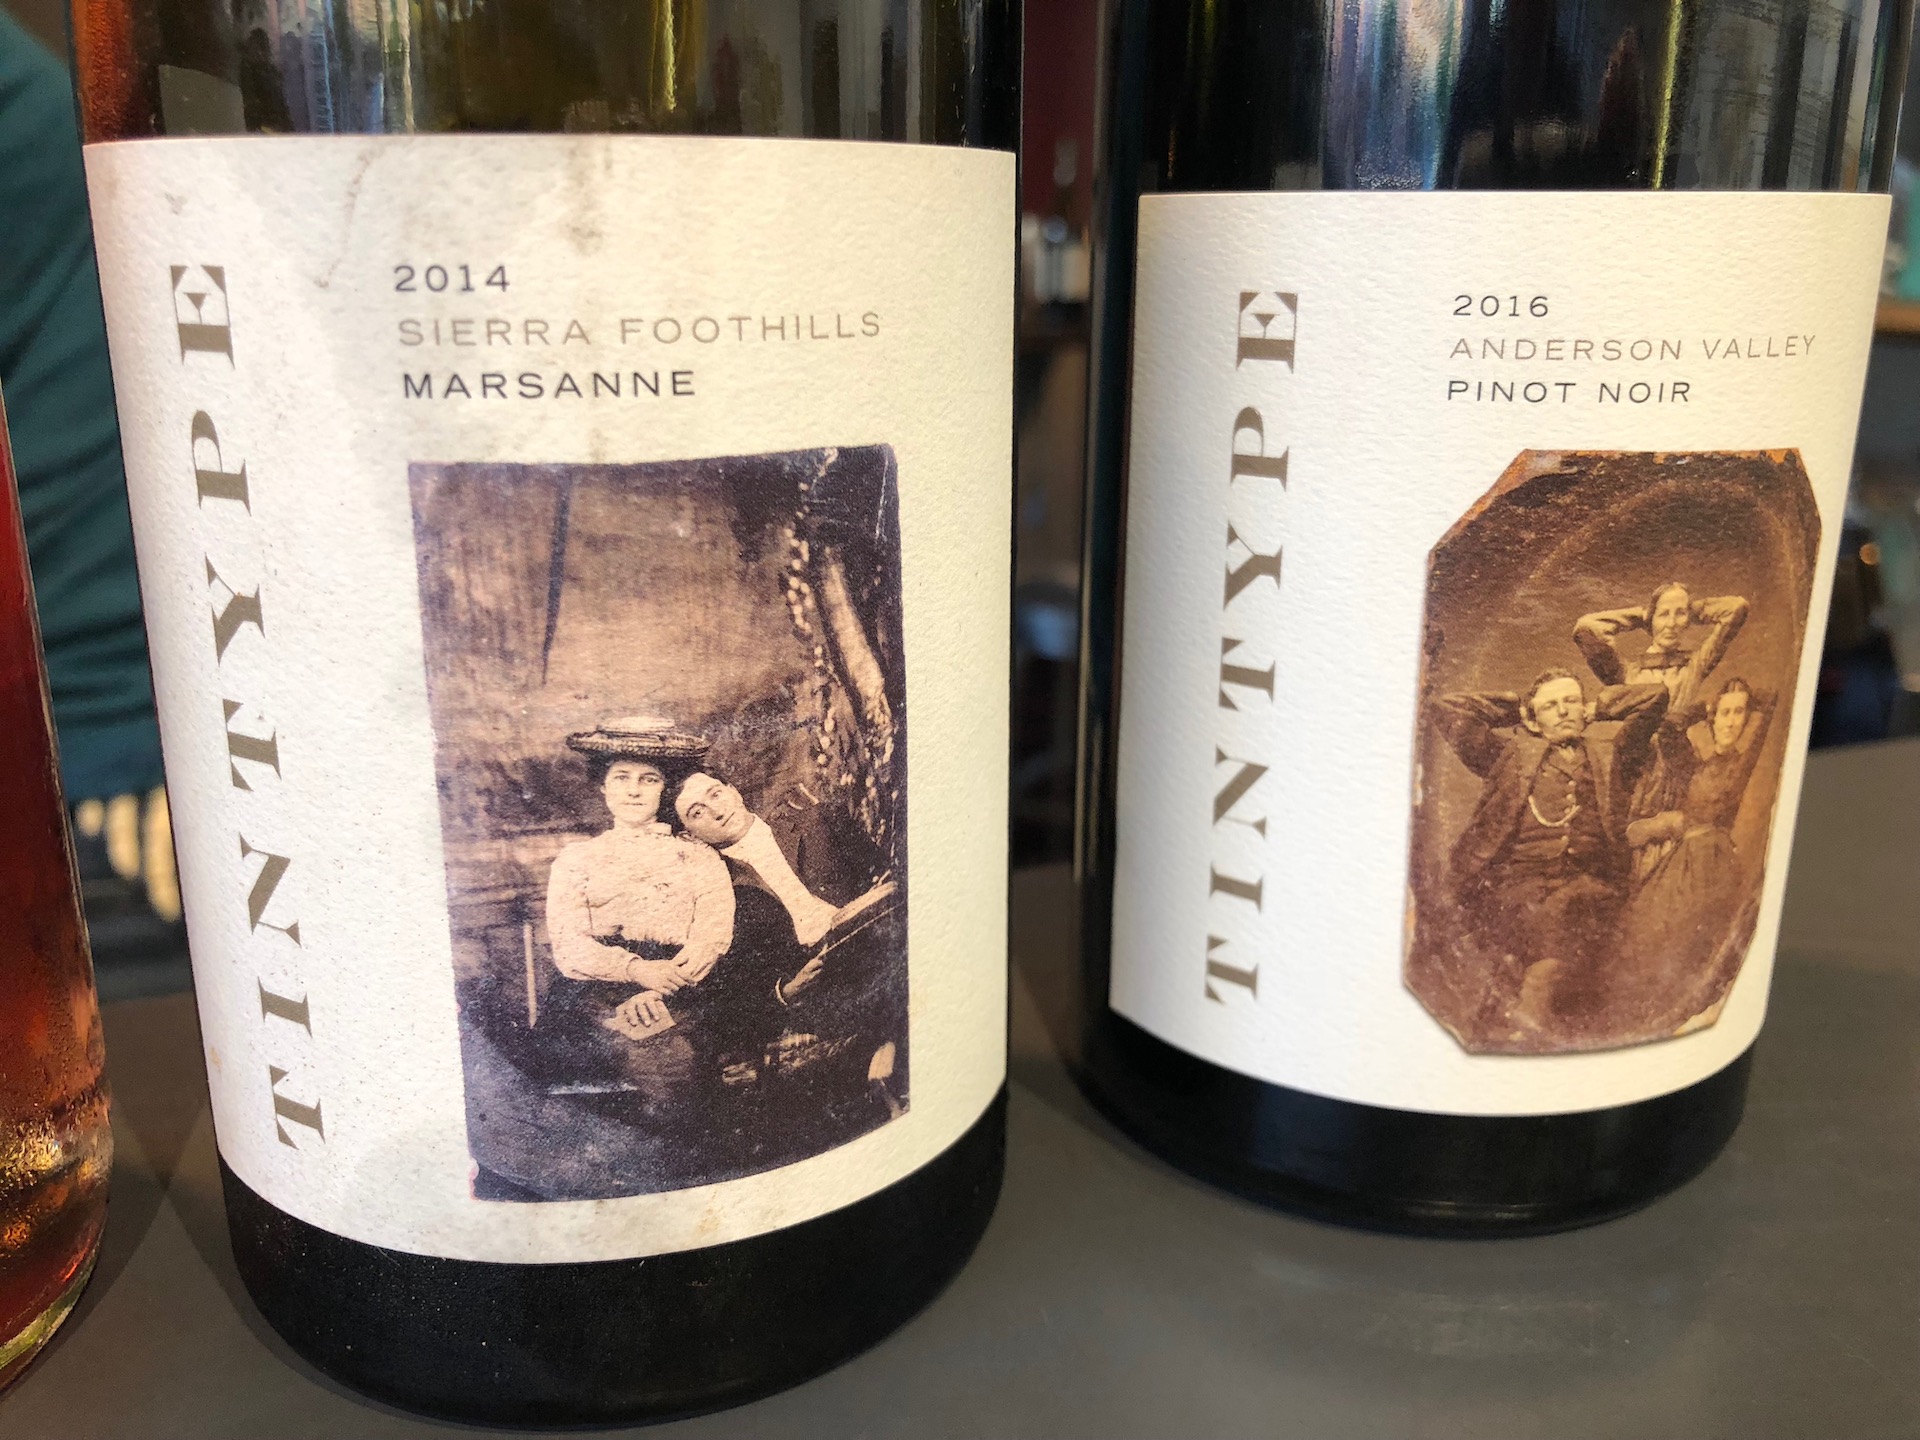 Tintype’s labels show how the wines are focused on different regions of California wine — and old photography